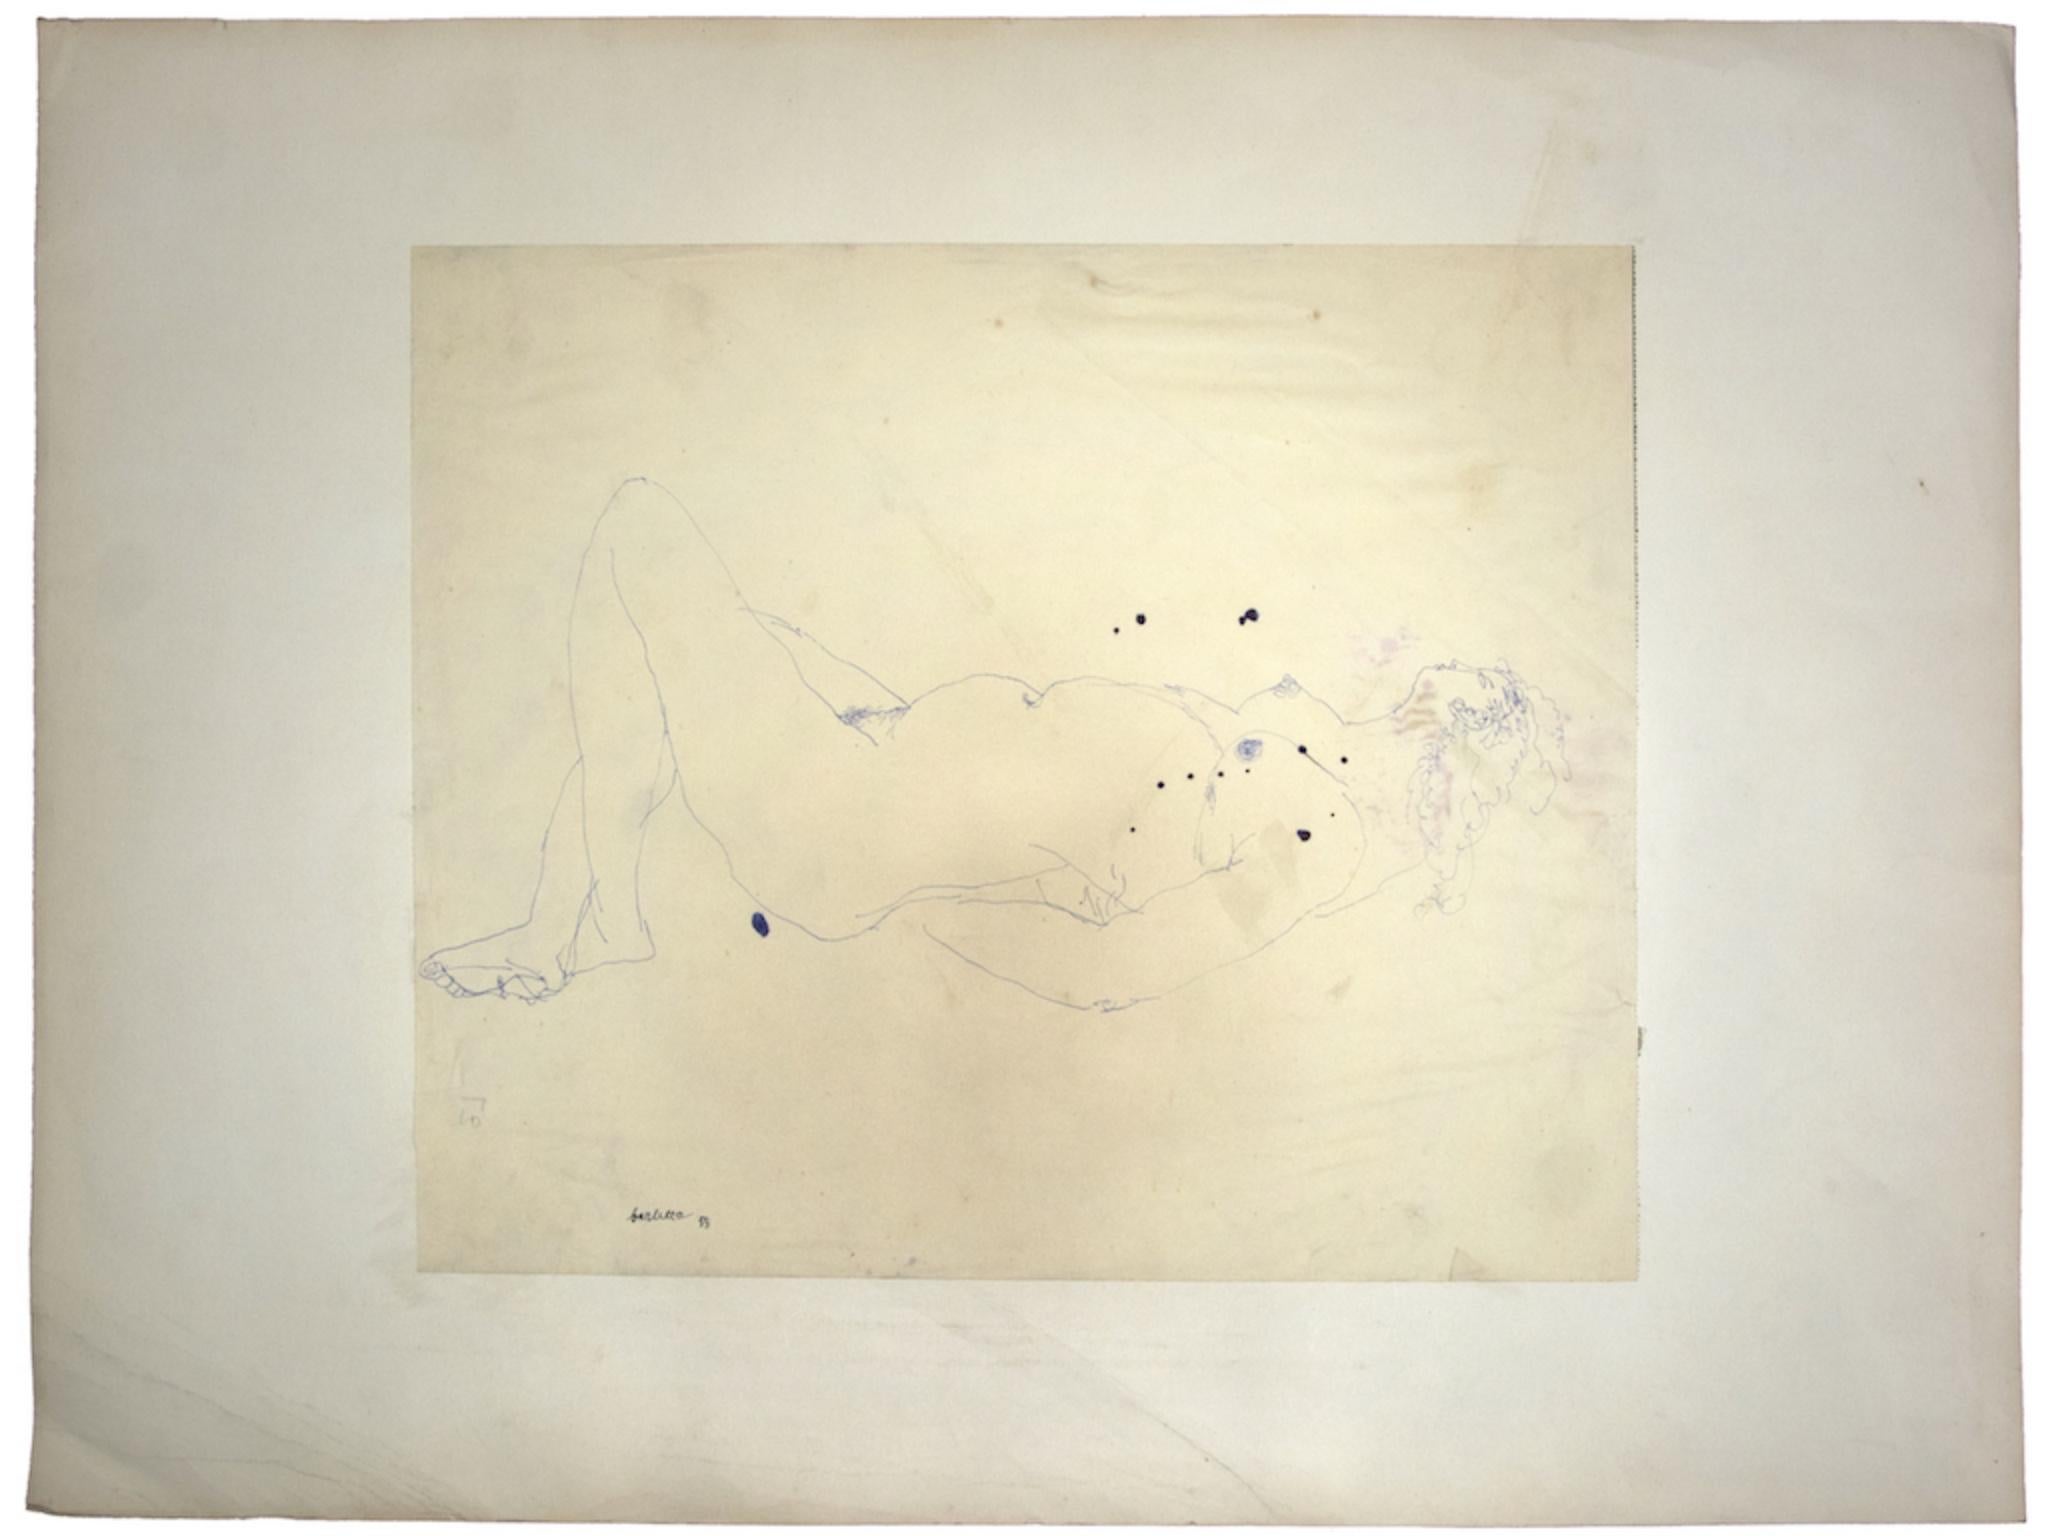 Nude is an original drawing in pen realized by Sergio Barletta in 1958.

Applied on passepartout: 49.5 x 79.5 cm.

Hand-signed on the lower left, and date.

In very good conditions with some folding and diffused foxing.

The artwork represents a